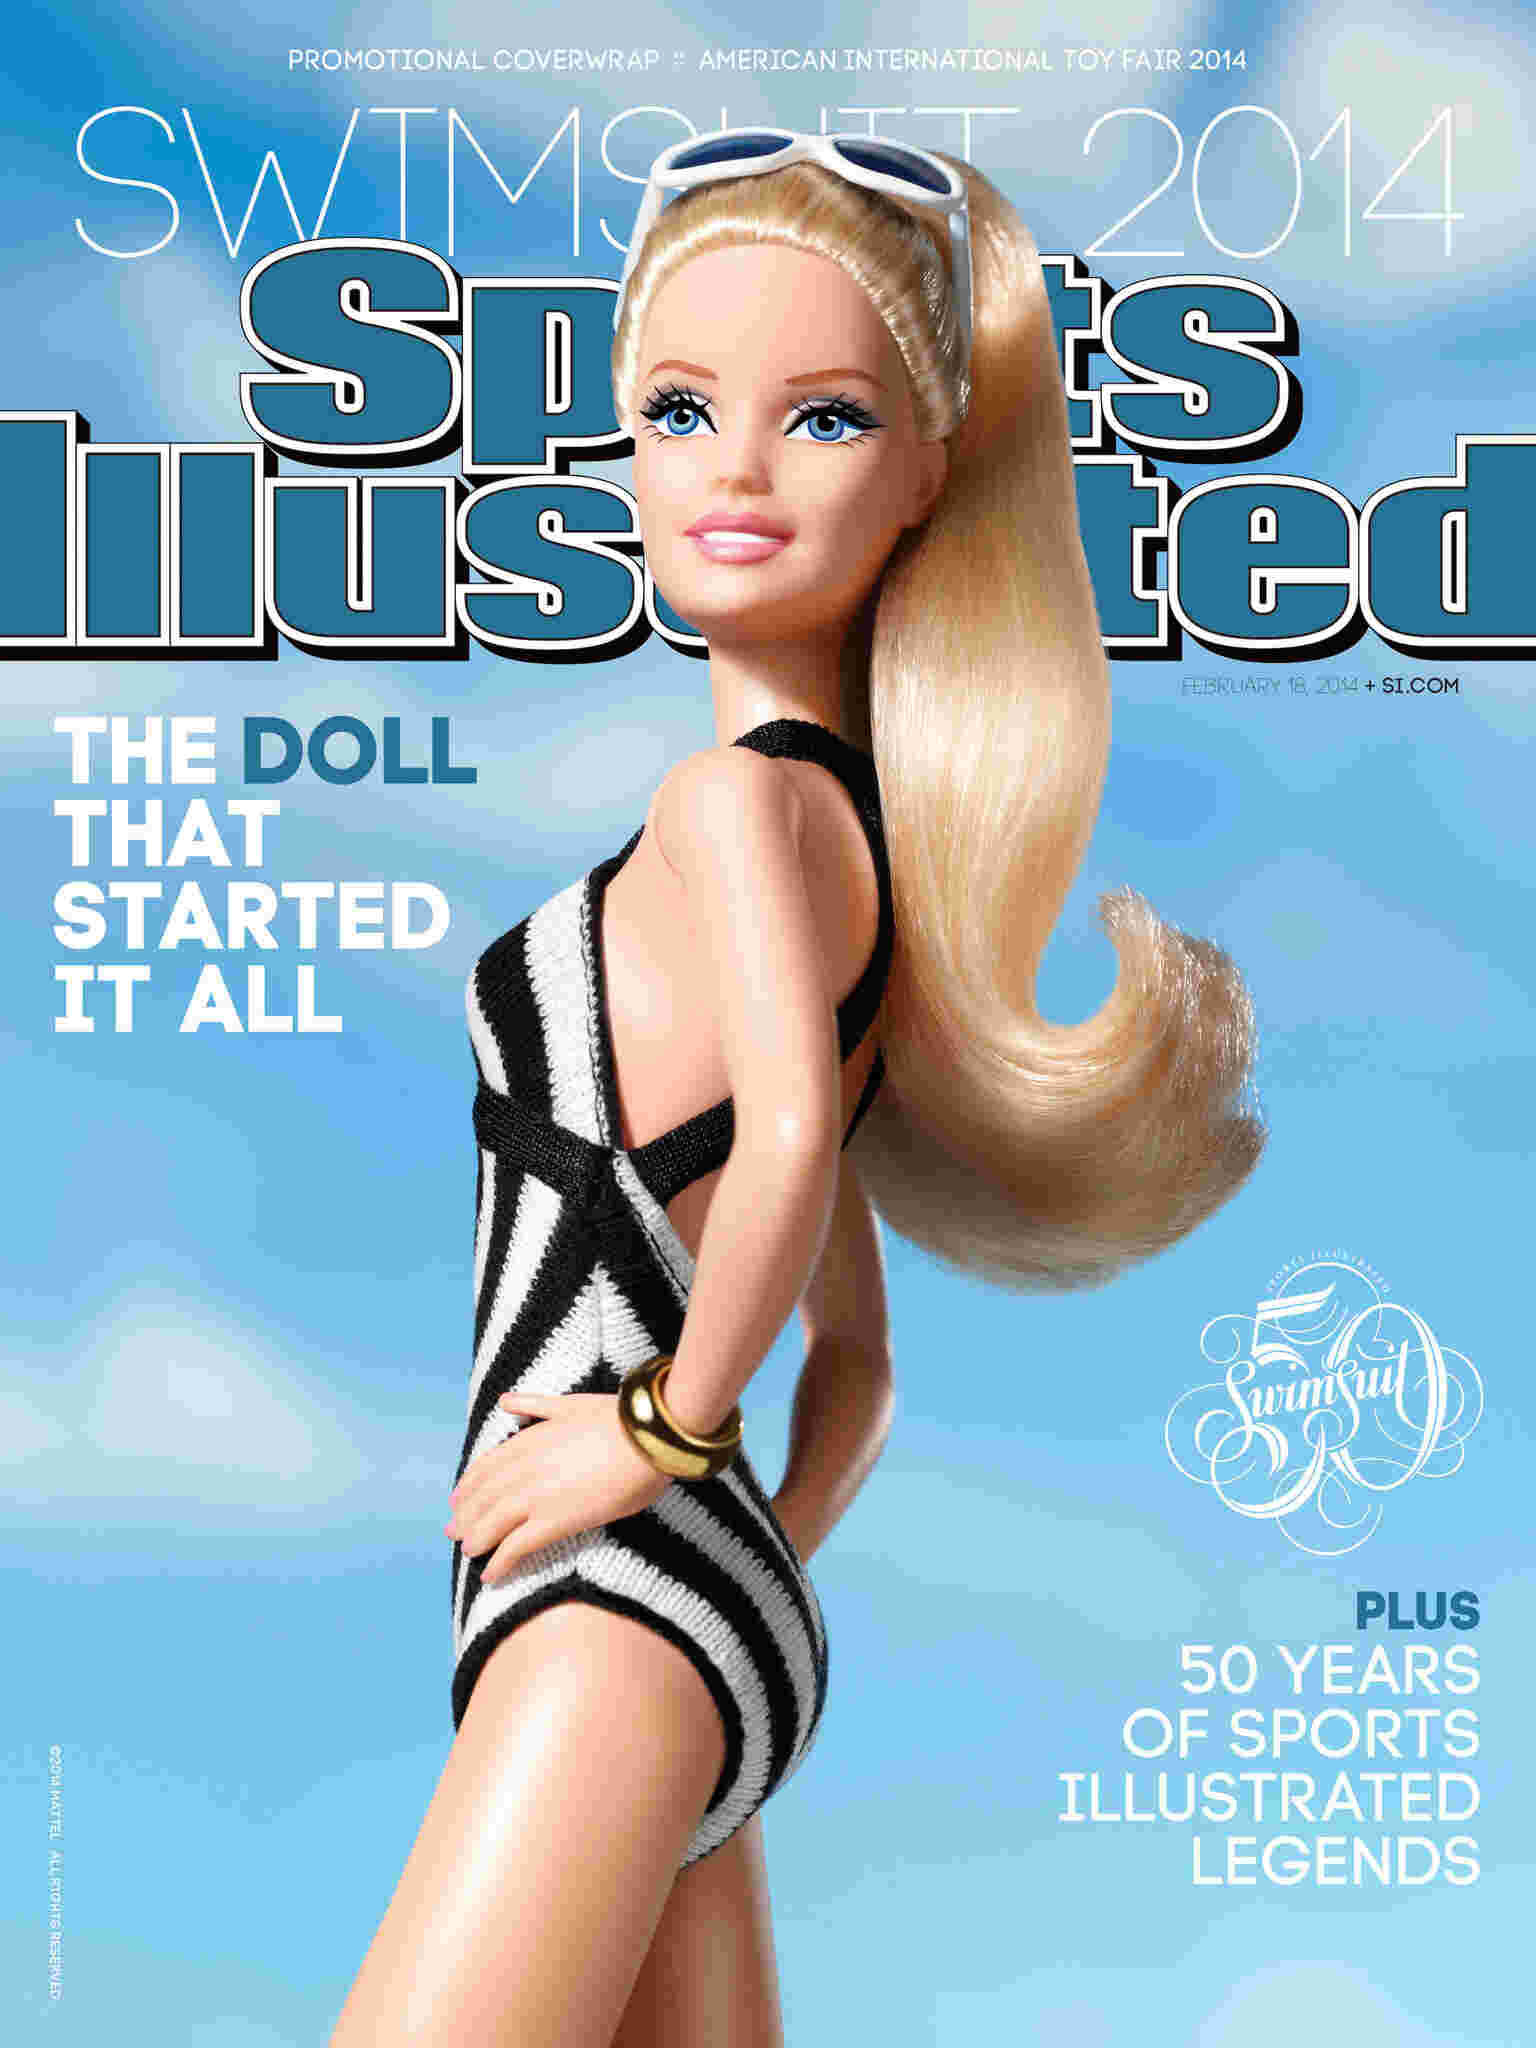 Barbie's Sports Illustrated Swimsuit Issue Causes a Stir Online - The New  York Times